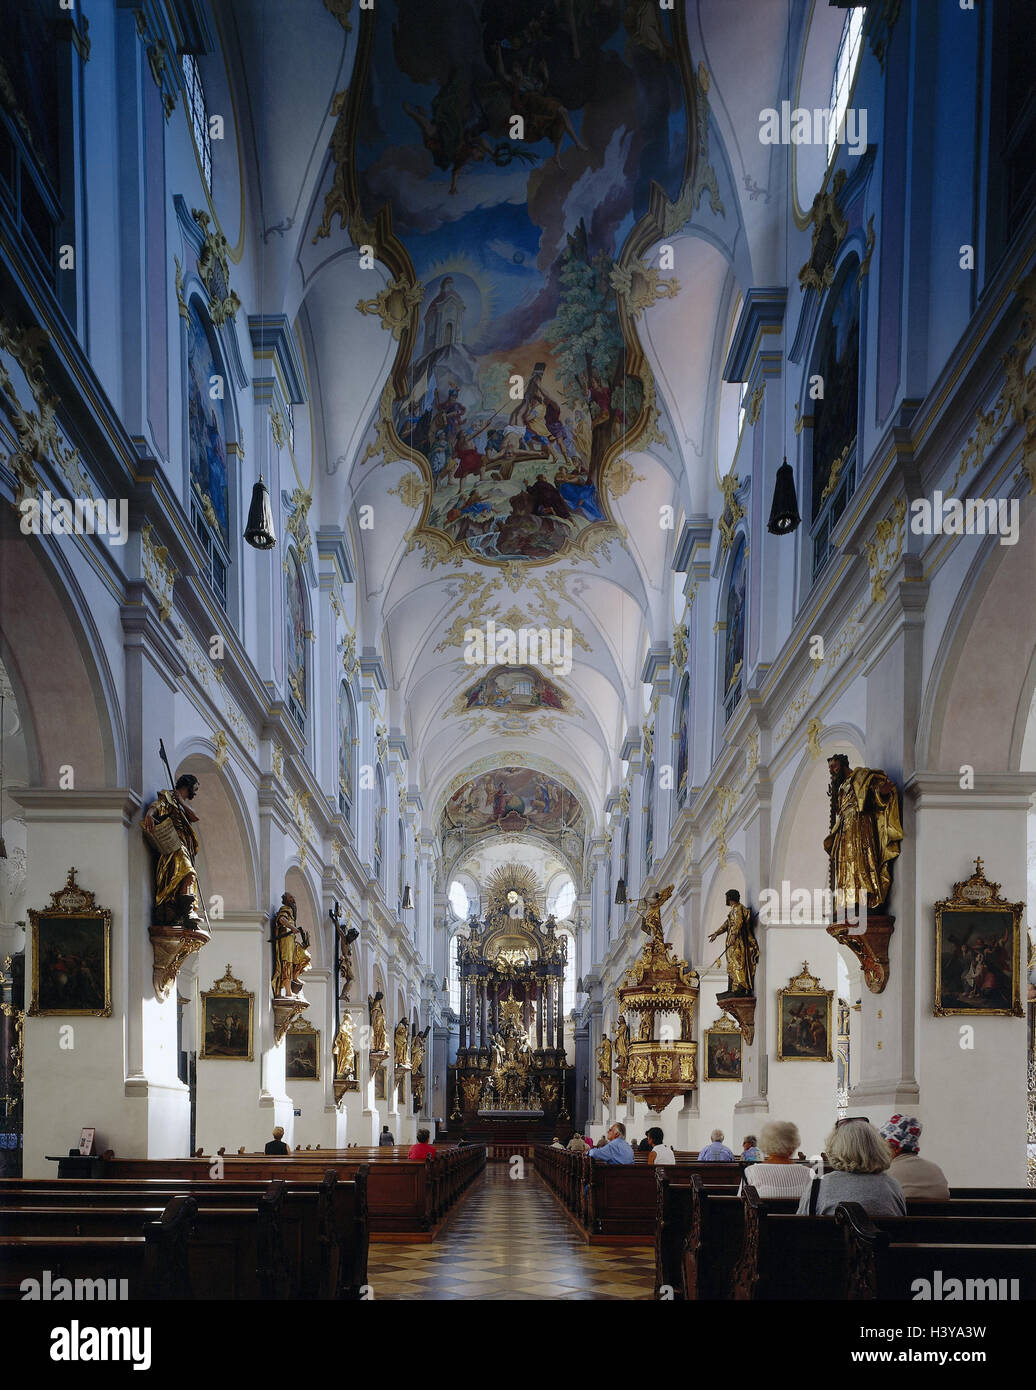 Germany, Bavaria, Munich, Peter's church, central nave, believers, Upper Bavaria, church, St. Peter, 'old Peter', inside, interior view, faith, religion, benches, saddles, altar, chancel, high altar, vault, ceiling fresco, frescoes, painting, culture, art Stock Photo